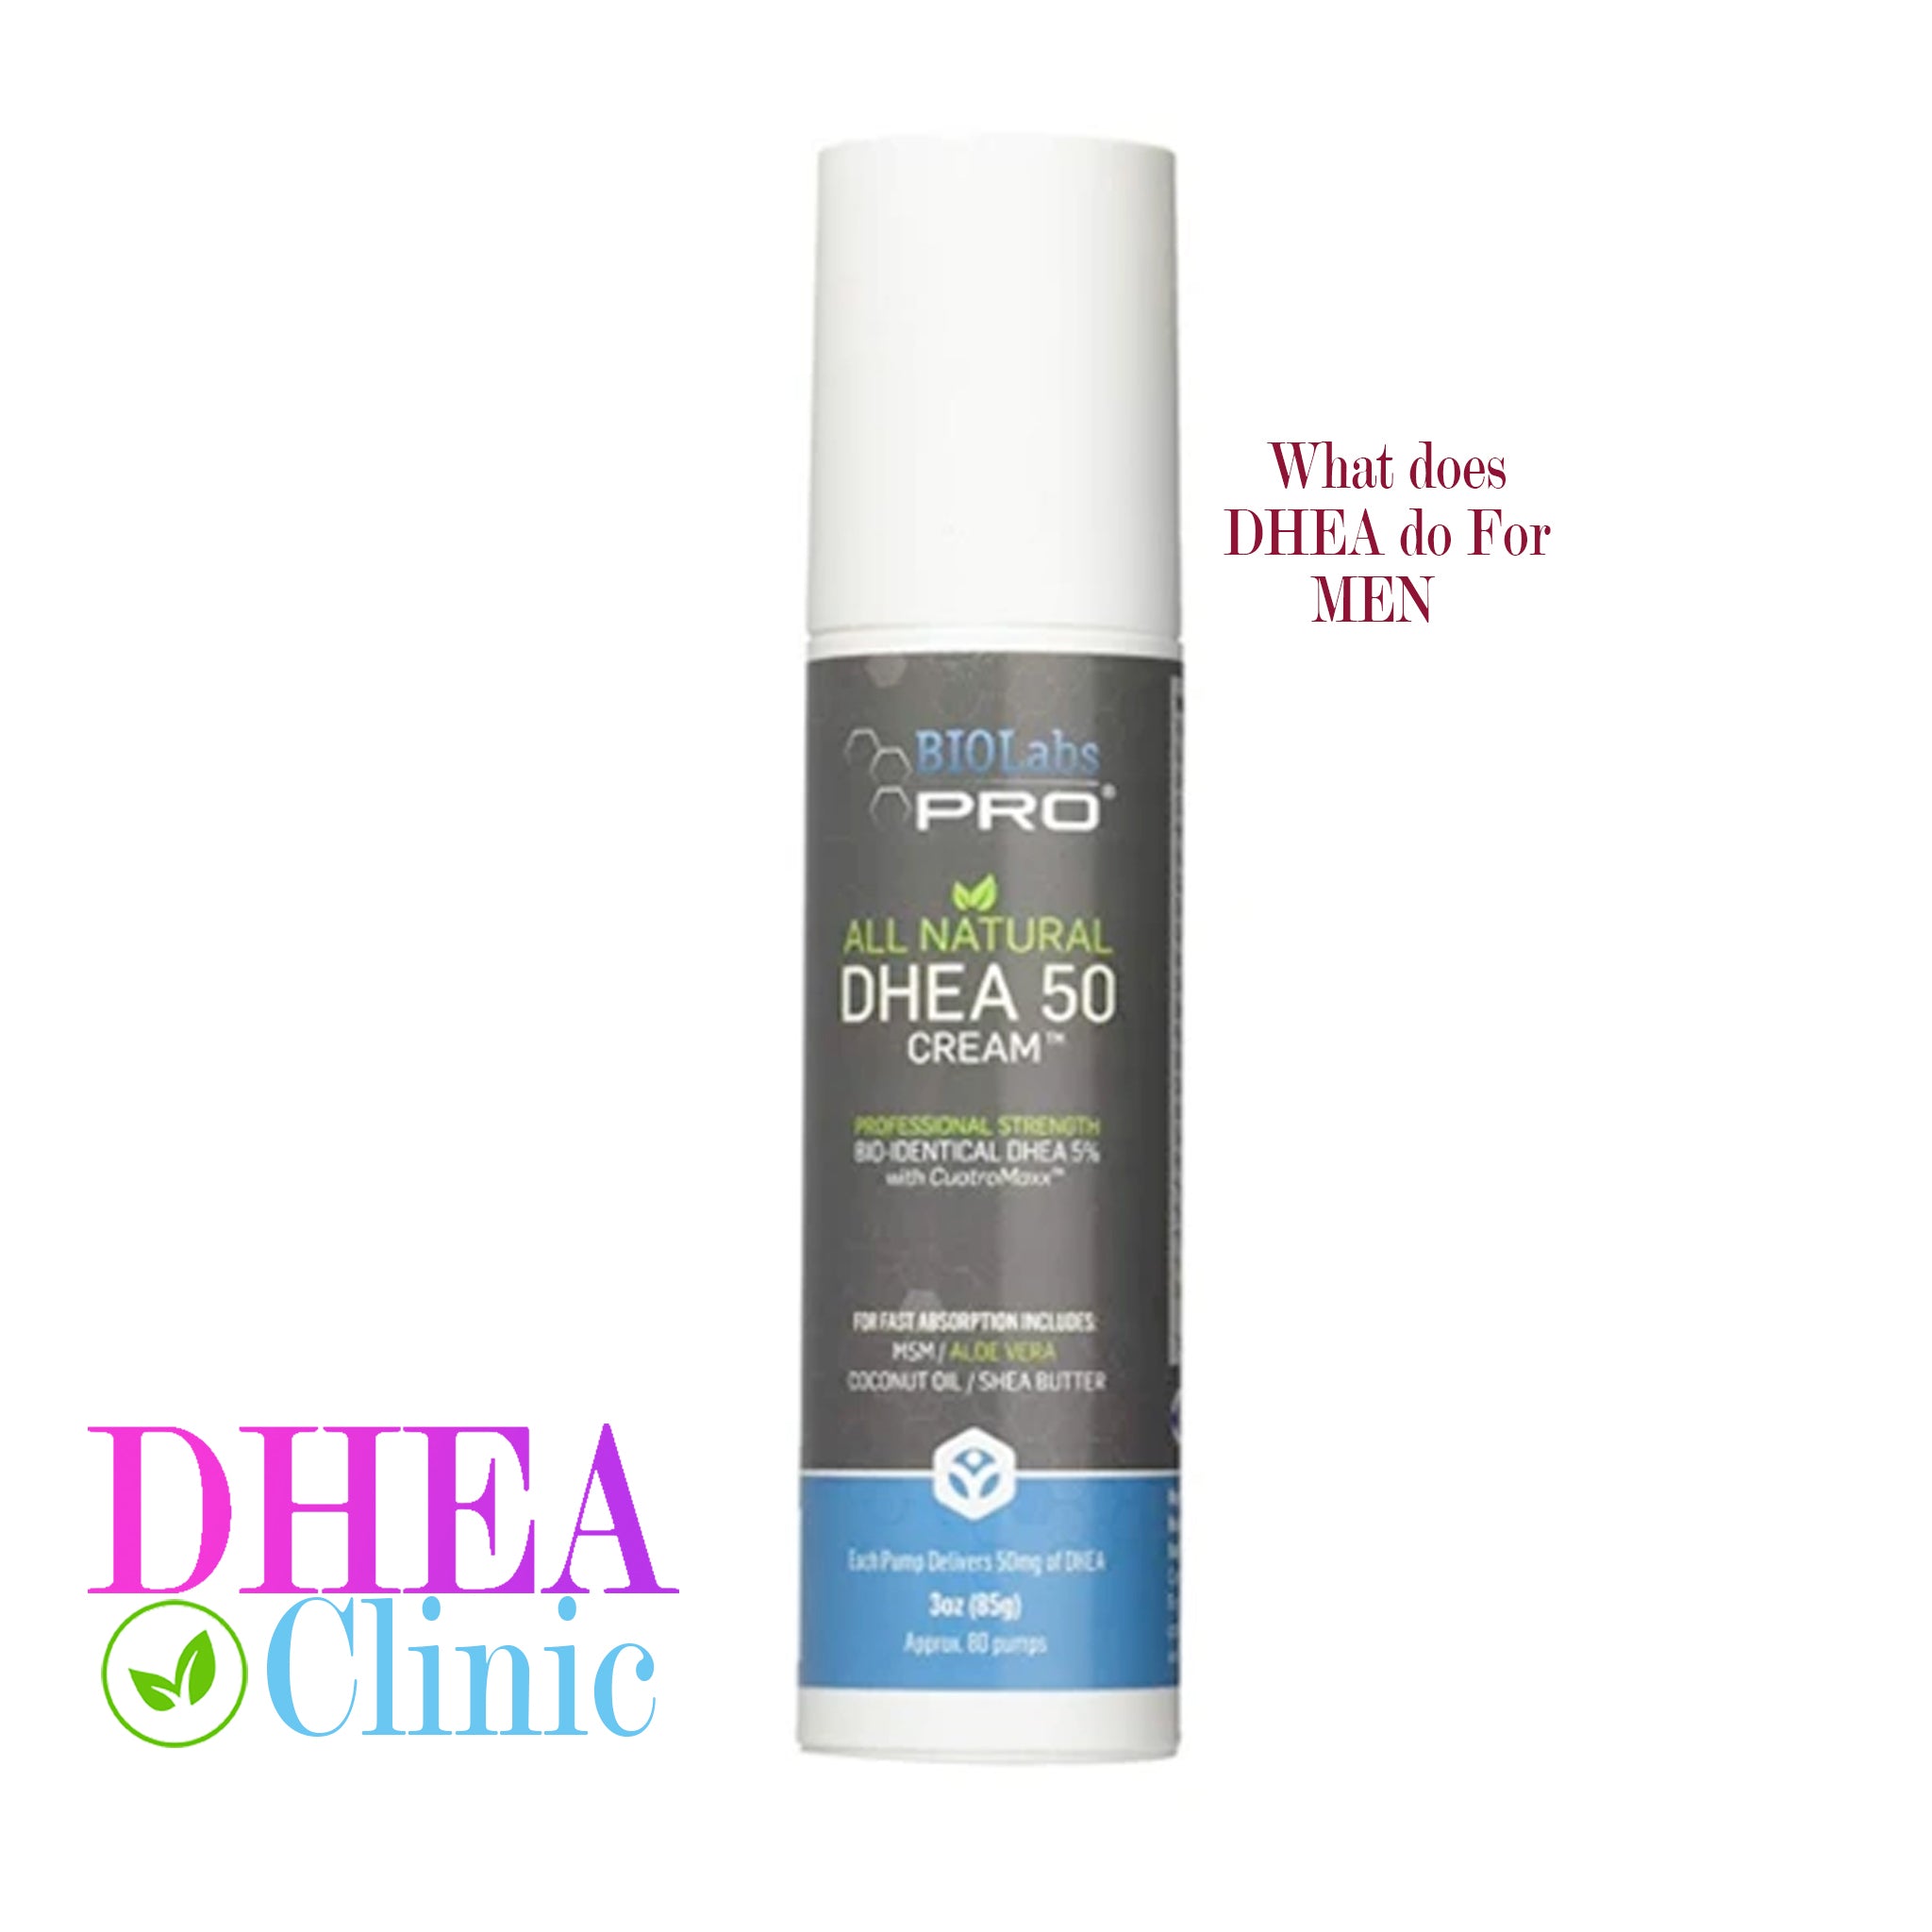 5 Benefits of what DHEA Does for a Man